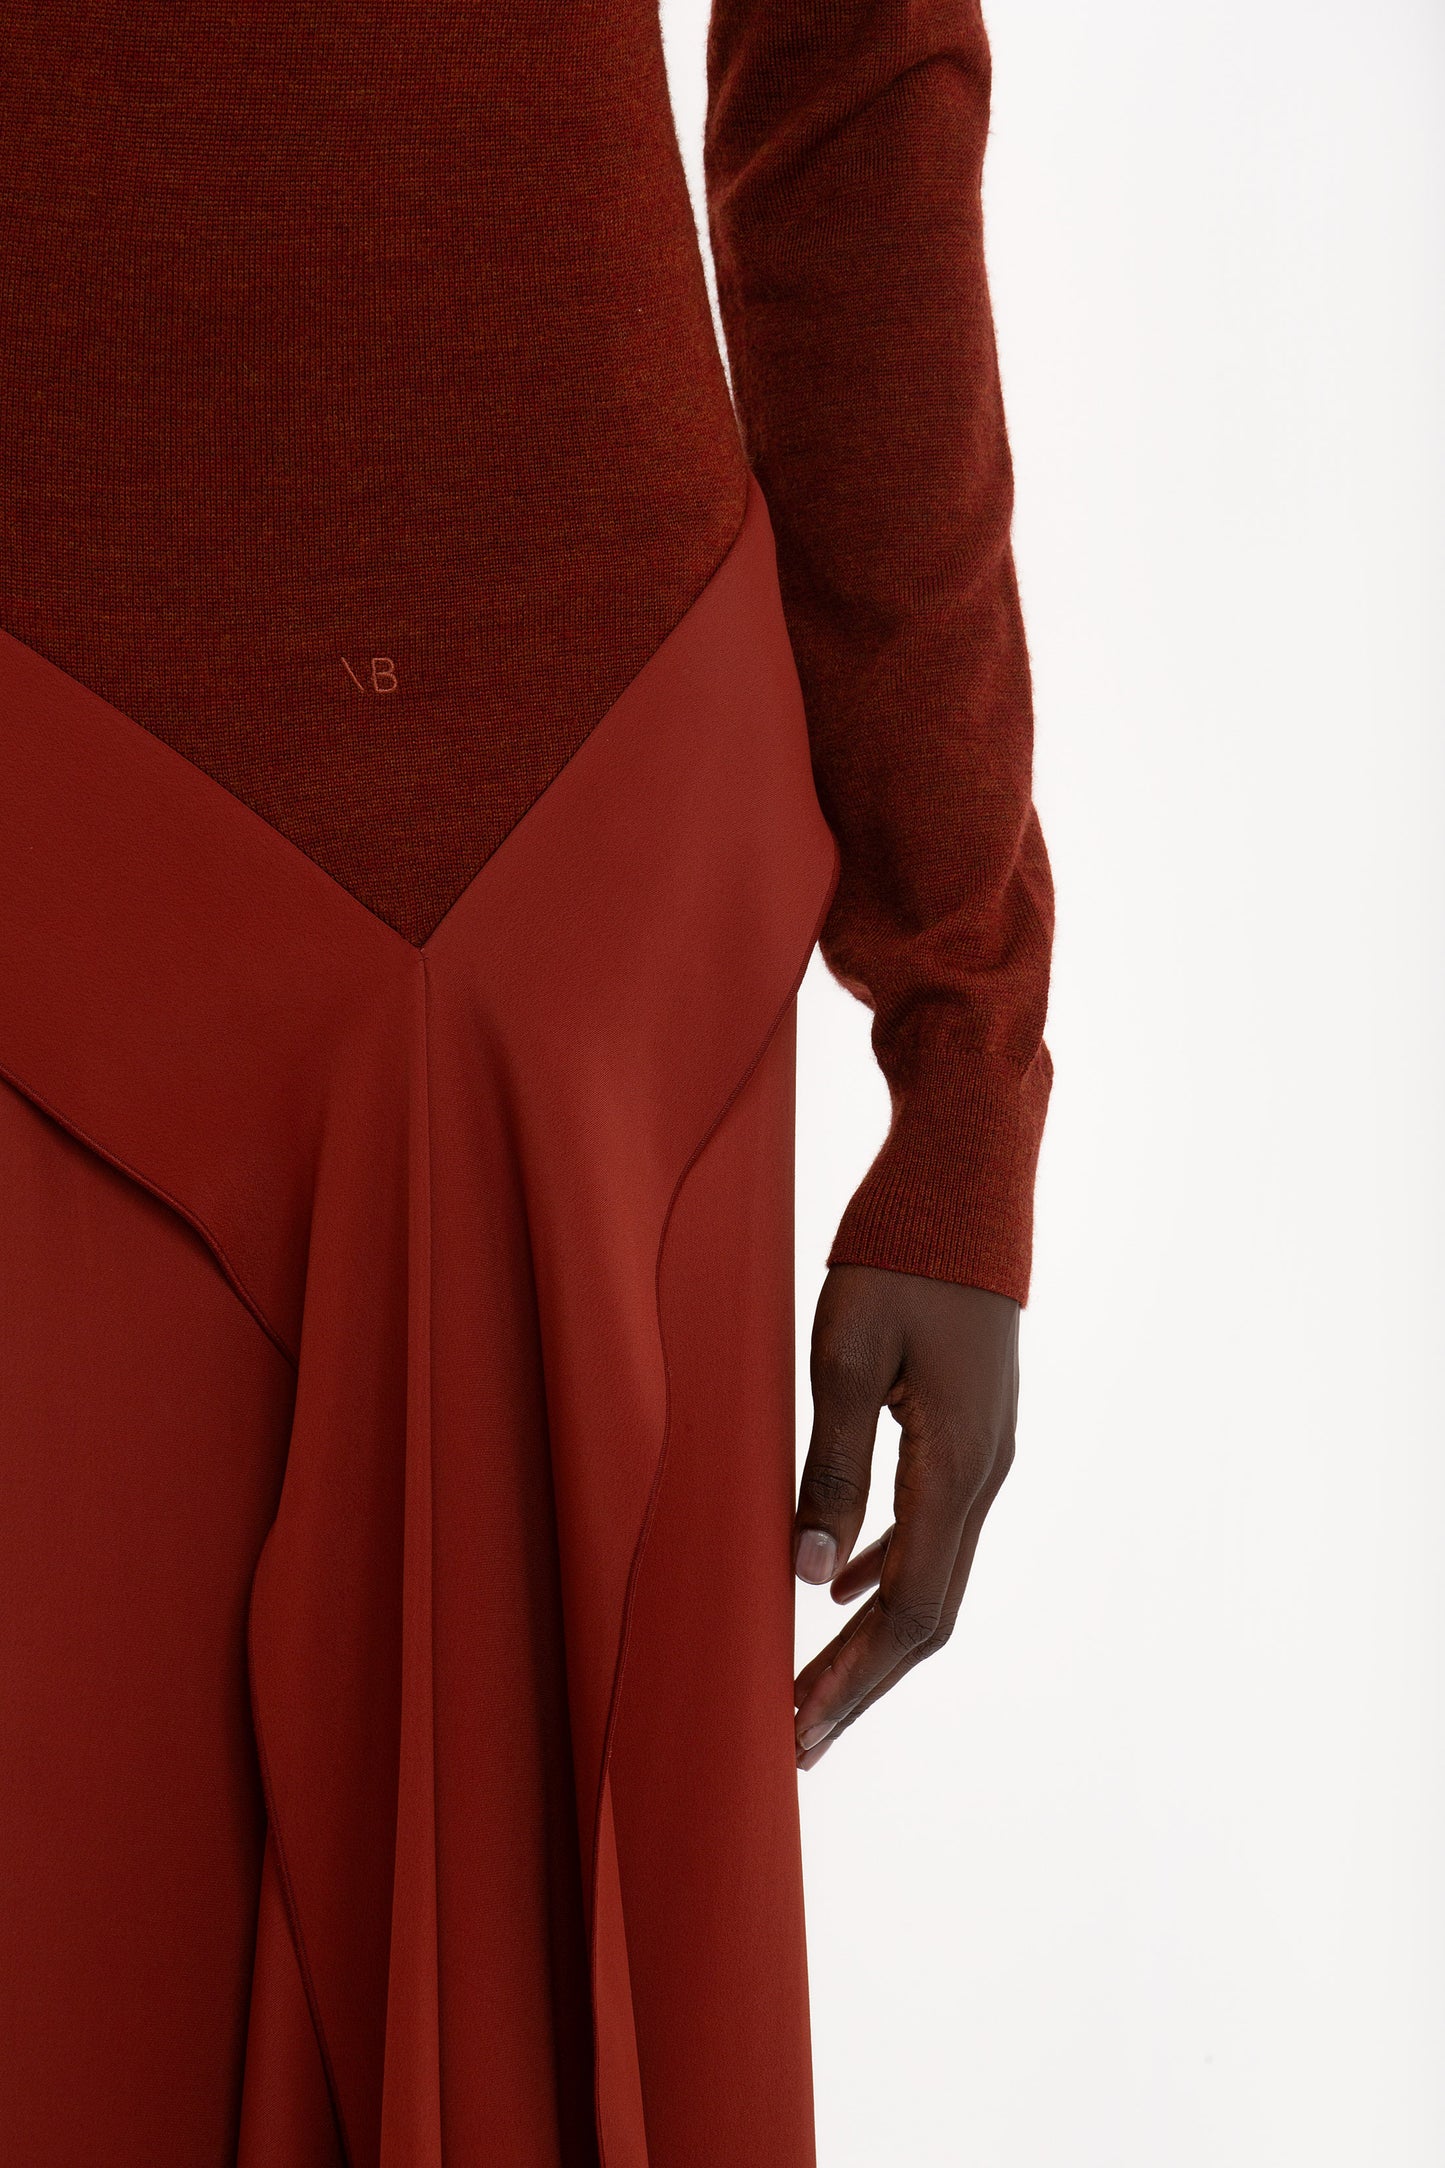 Close-up of a person wearing a Victoria Beckham High Neck Tie Detail Dress In Russet with long sleeves and a unique draped design detail. The image focuses on their hand and the lower part of this stylish High Neck Tie Detail Dress In Russet.